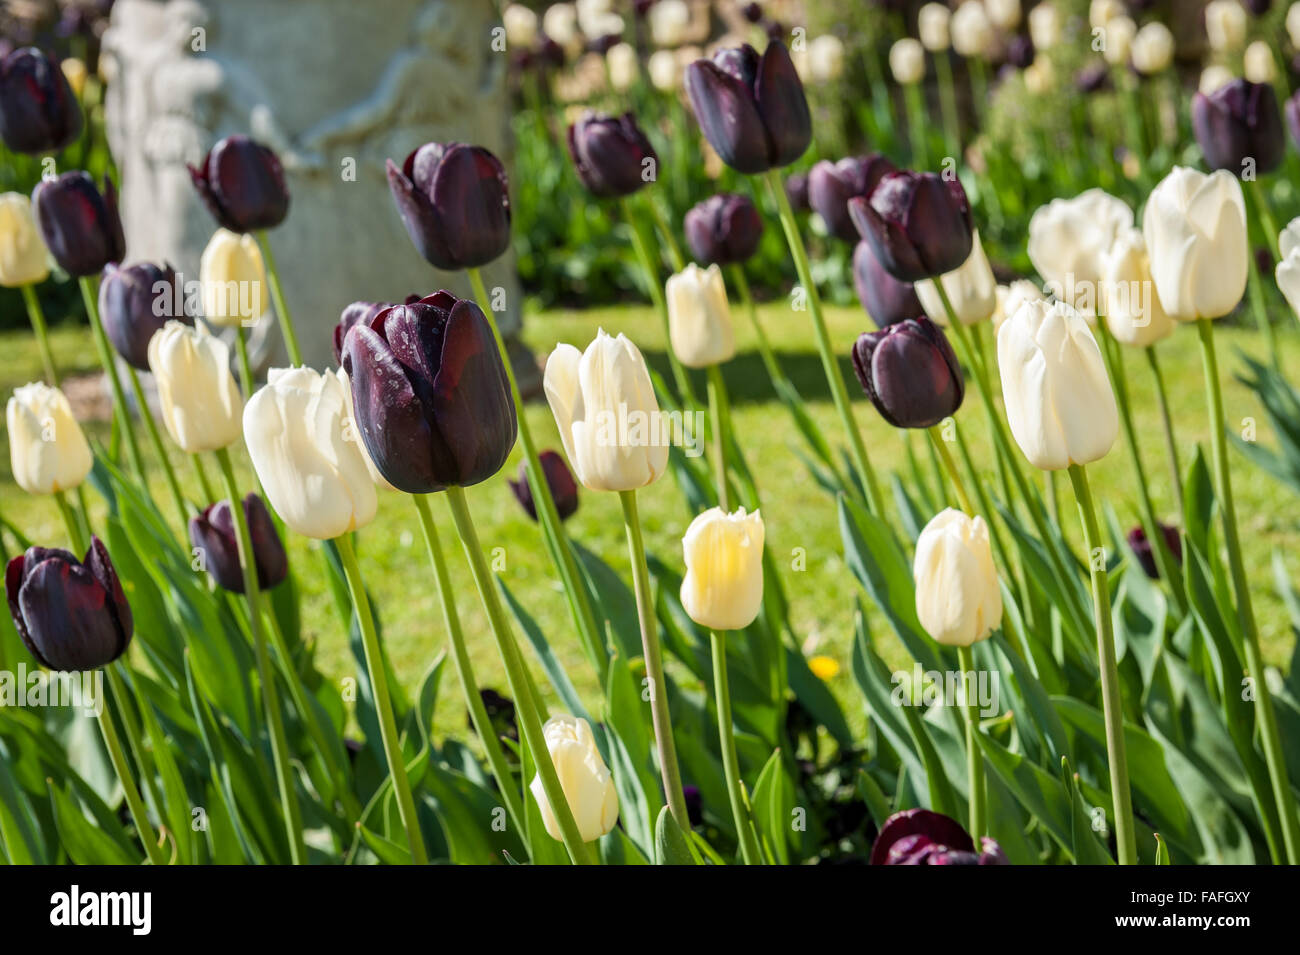 black and white Tulips in garden bed in summer Stock Photo